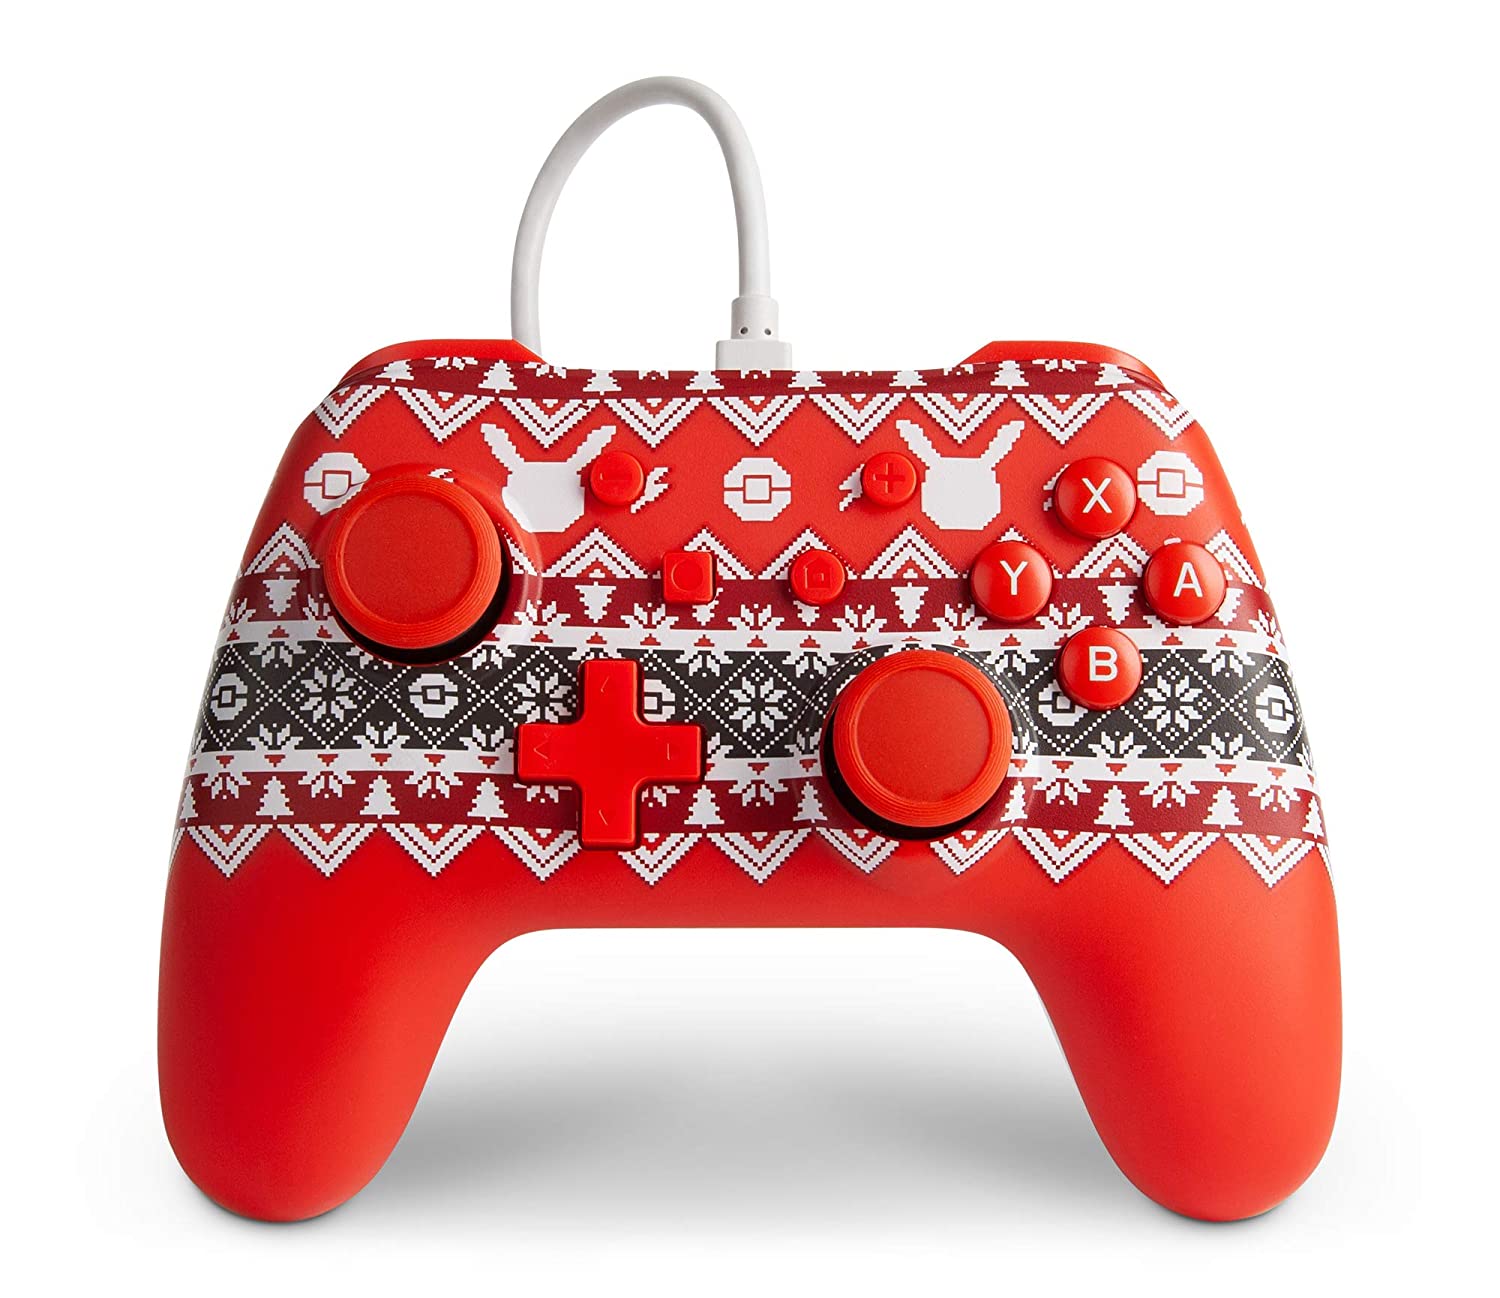 PowerA Wired Controller for Nintendo Switch: Pokemon Holiday Sweater $12.82, Mario Holiday Sweater $12.38